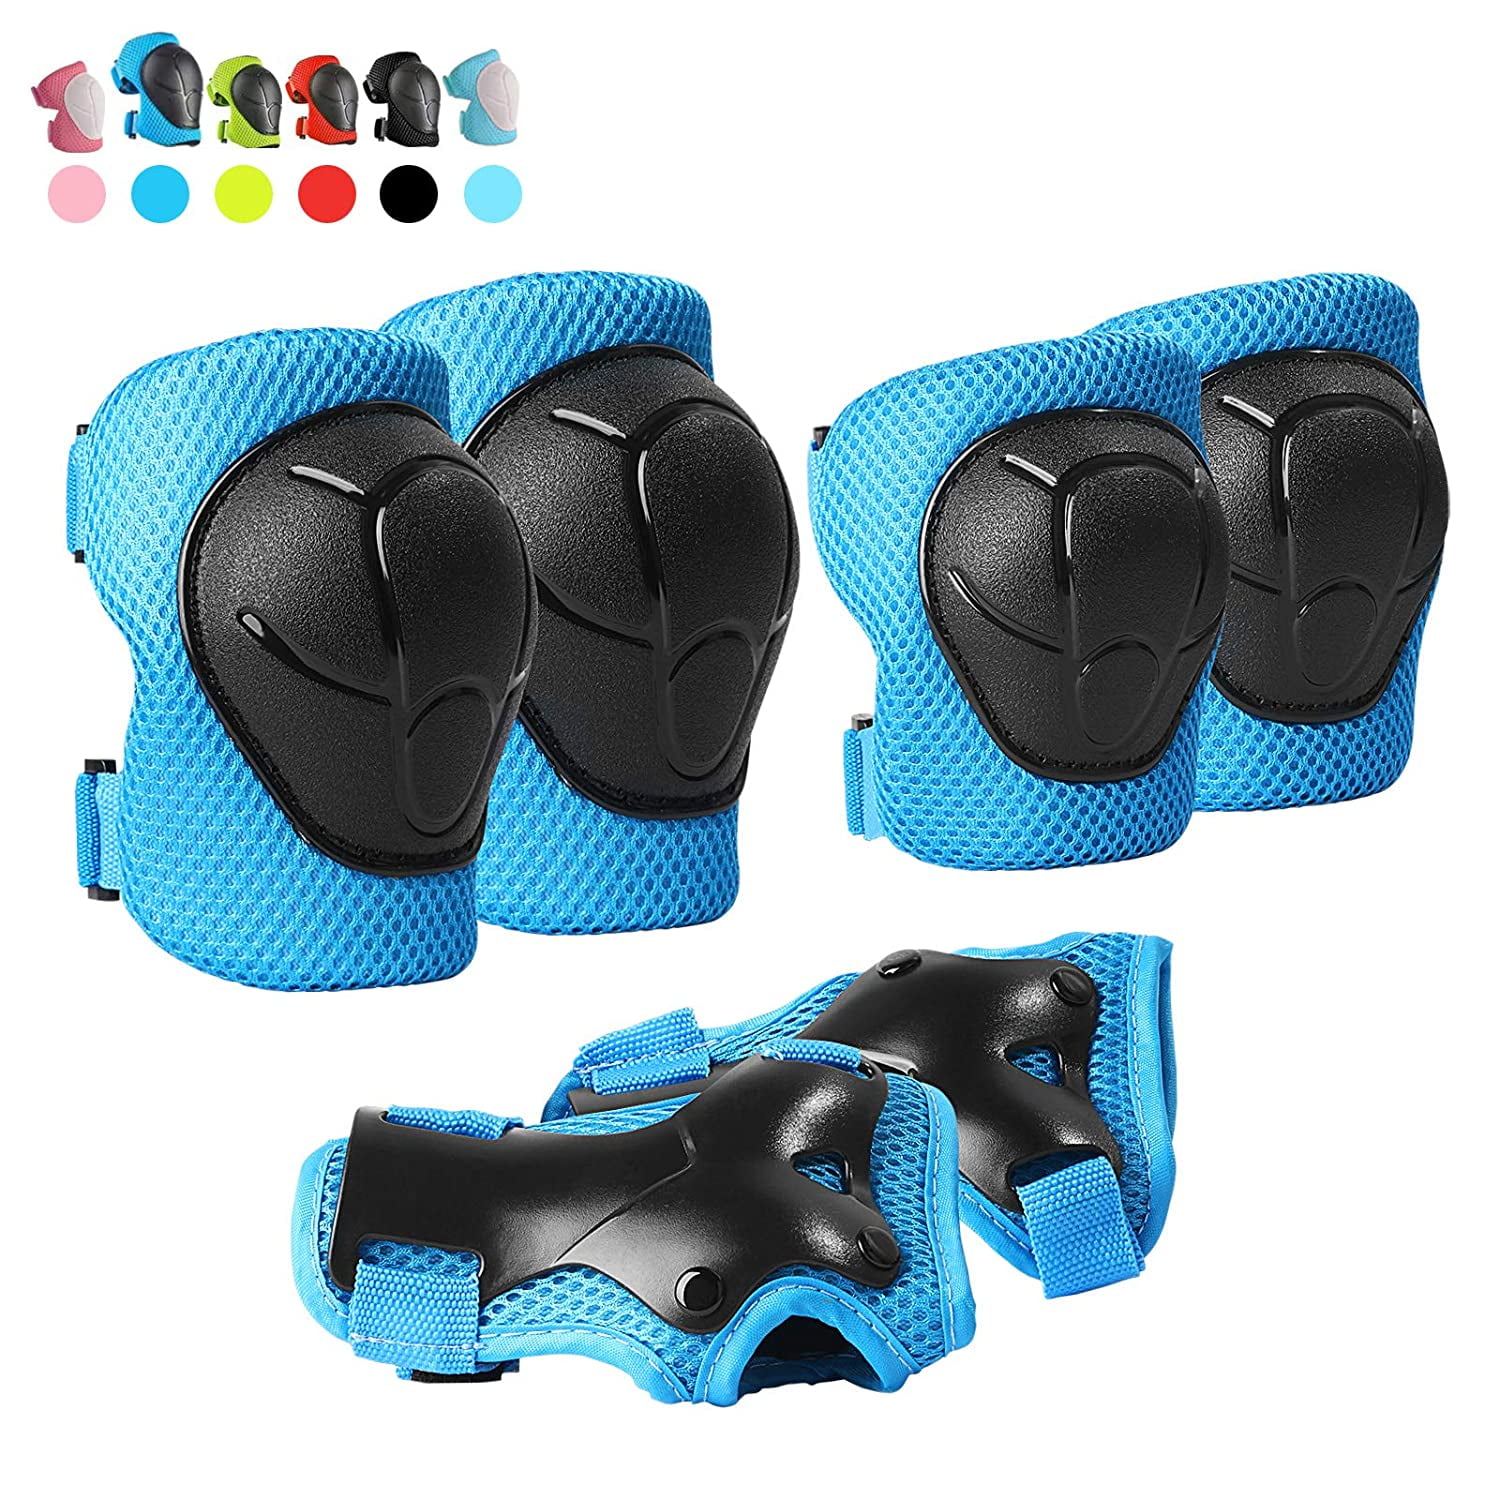 Protective Gear Sets for Skateboard Cycling Roller Skating Knee Elbow Wrist Safe 